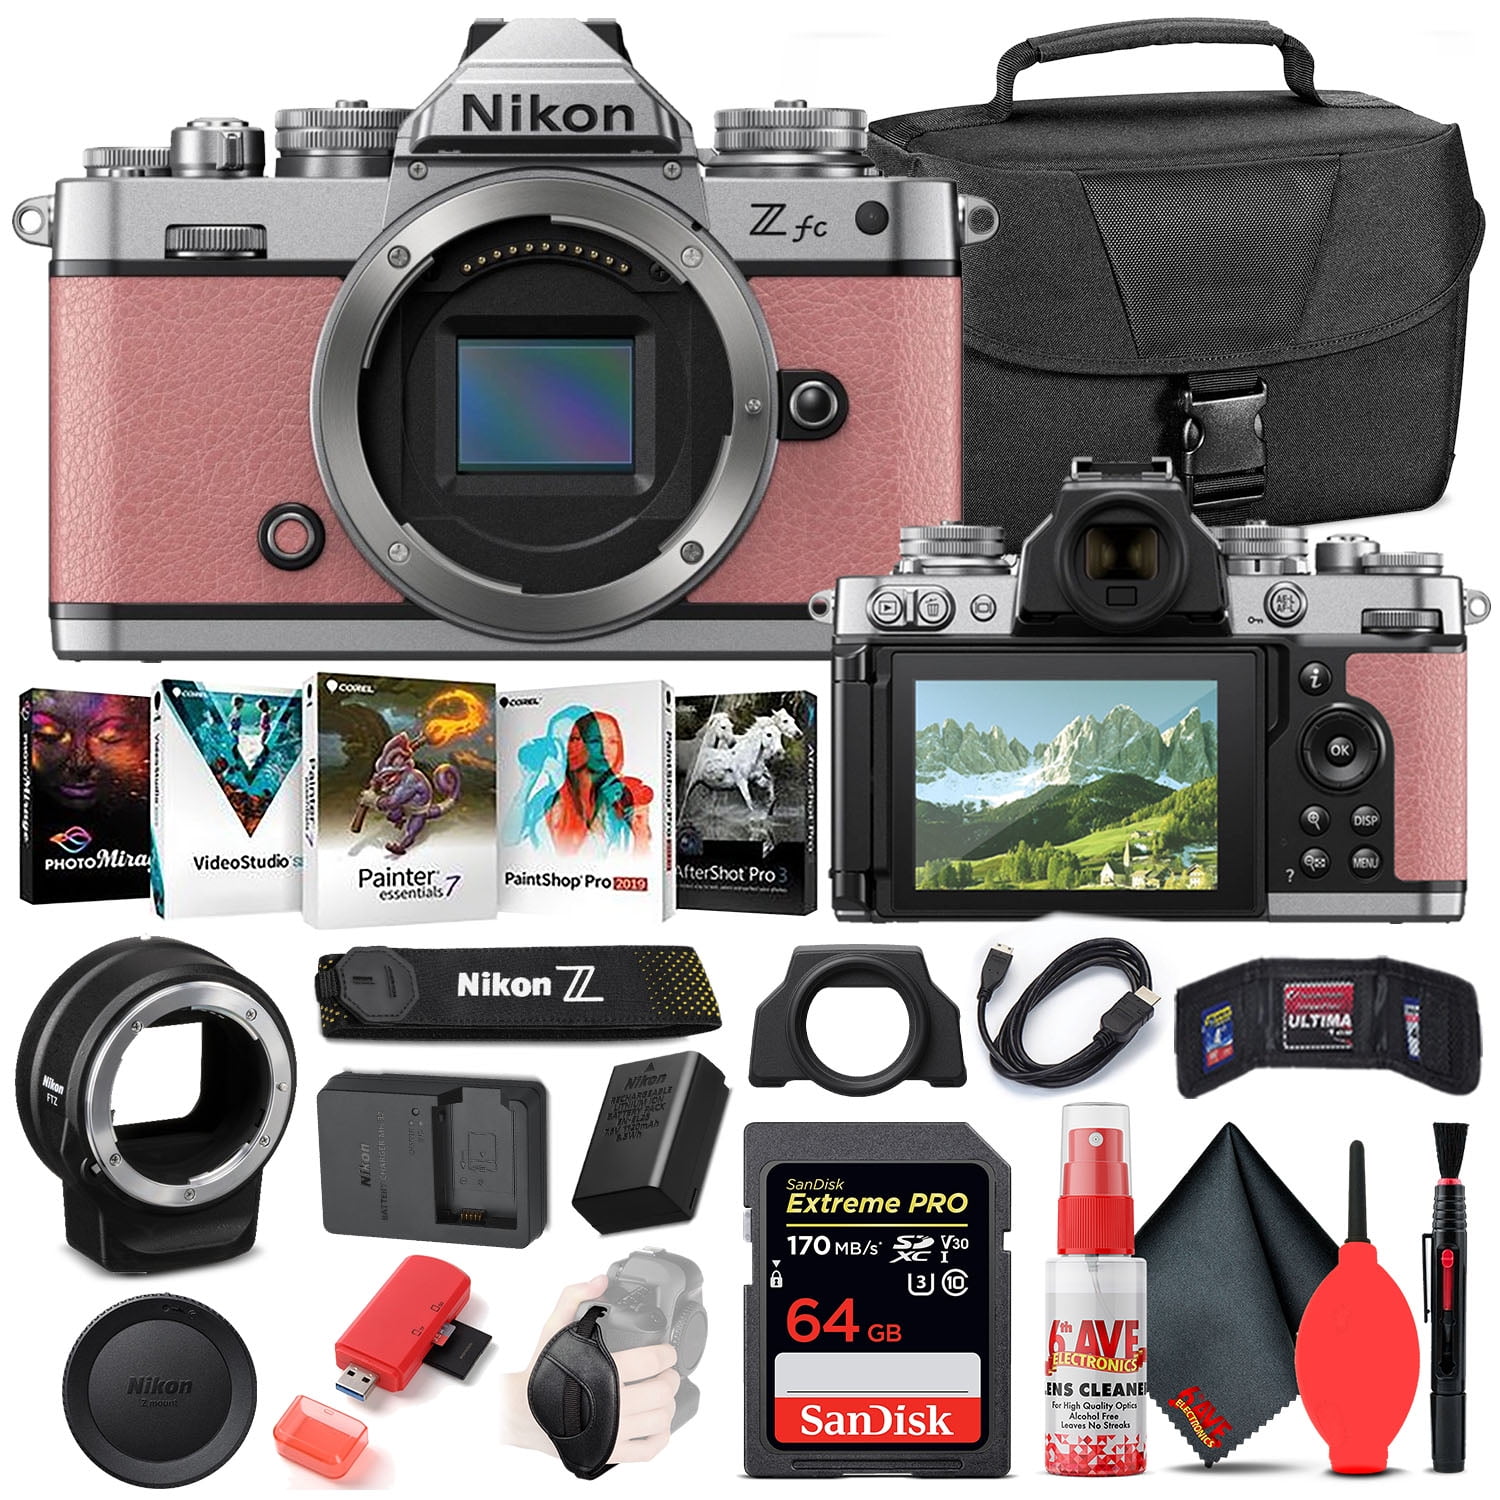 Nikon Z fc Mirrorless Digital Camera (Body Only) (Sand Beige, ZFC092AA)  Intl Model Bundle with FTZ Adapter + 64GB Extreme PRO SD Card + Camera Bag  + Editing Software + Hand Strap +